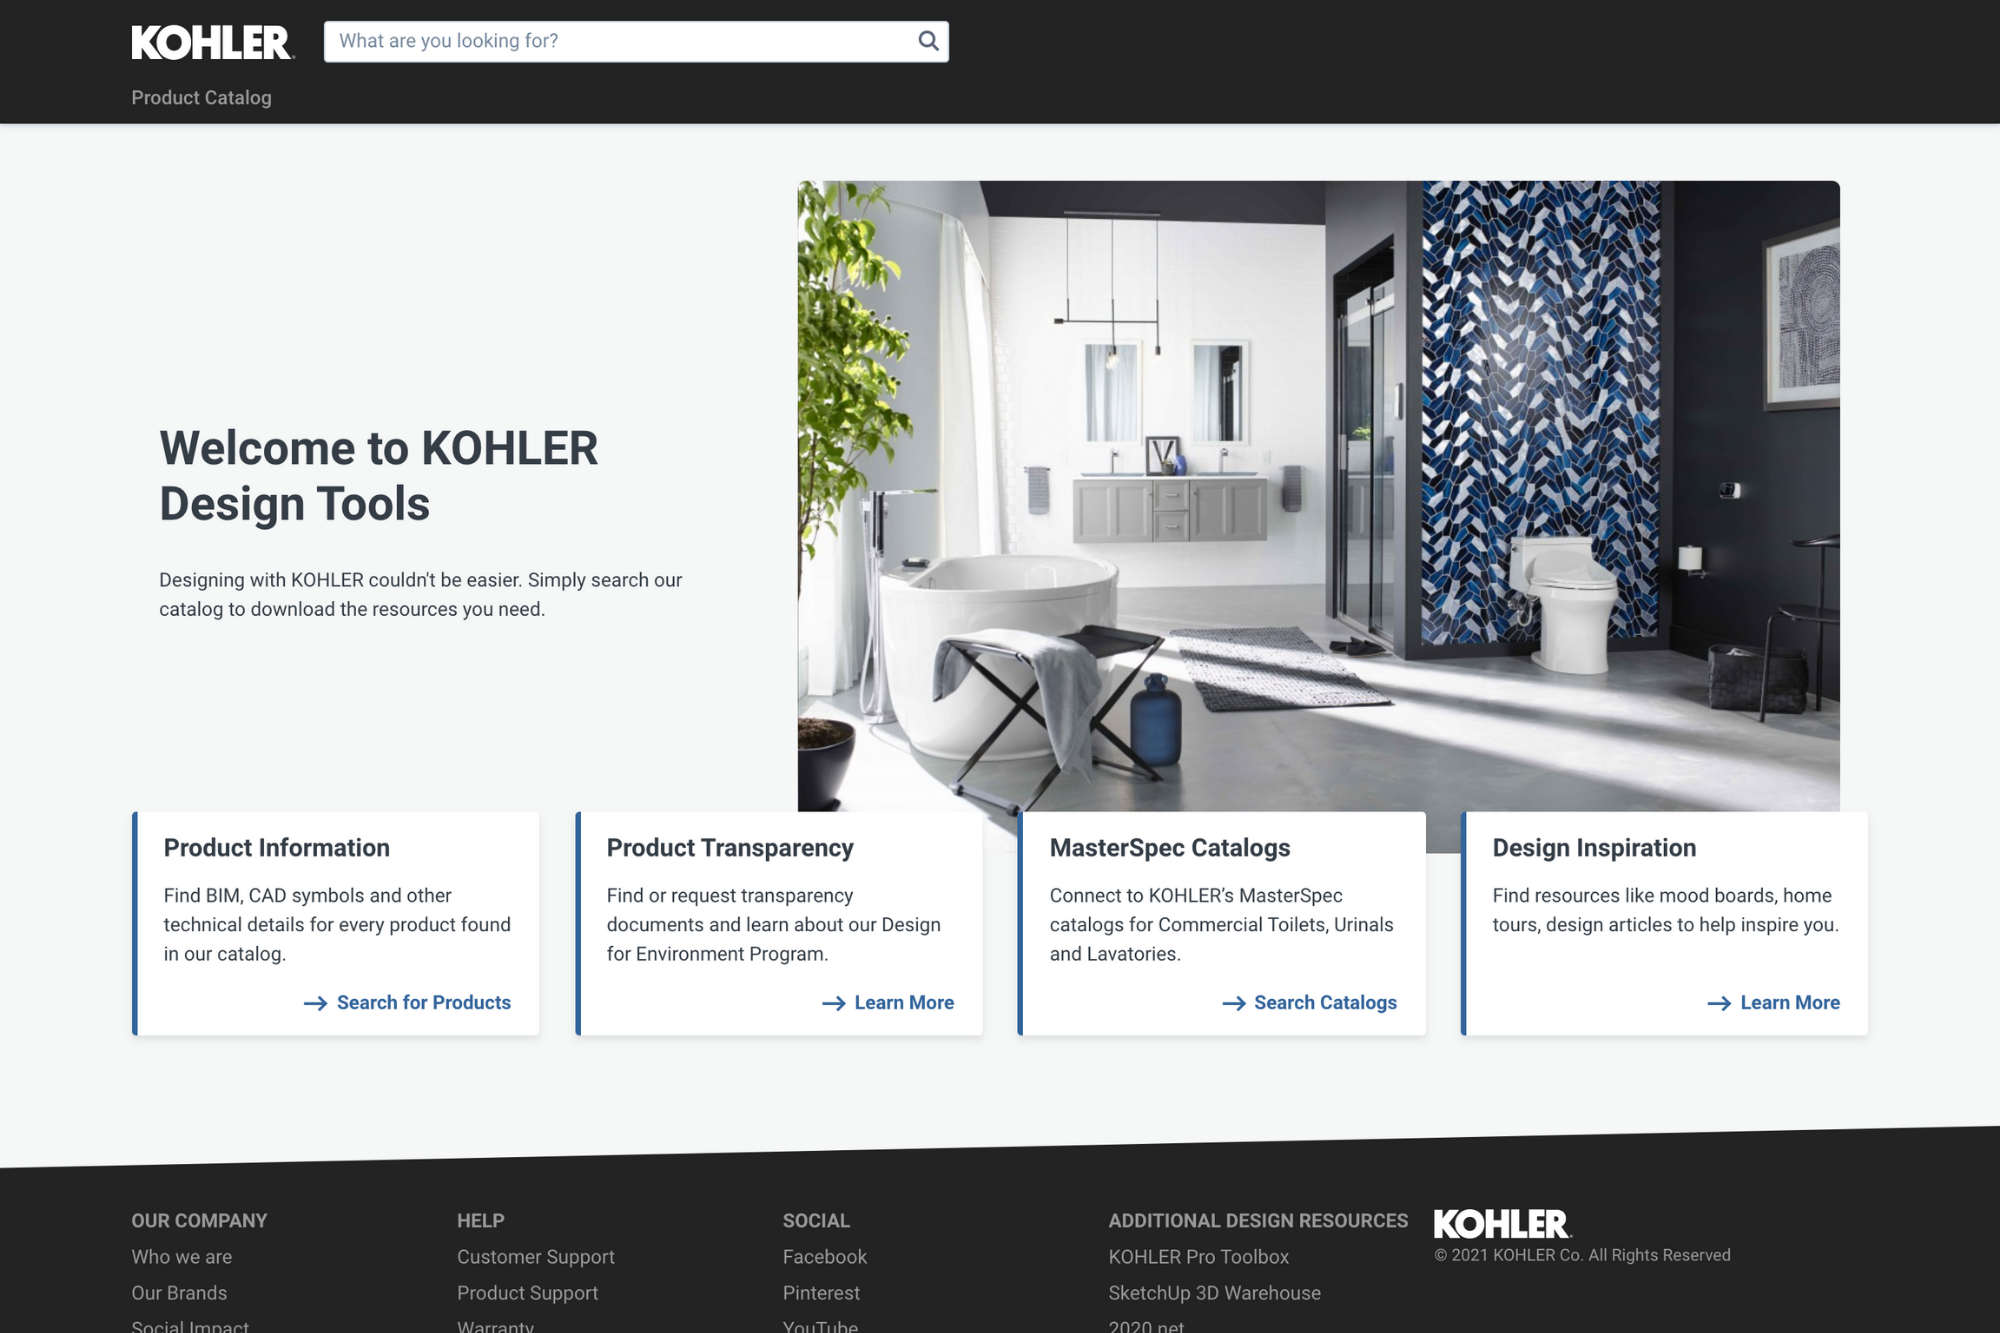 Kohler Design Tools powered by Concora